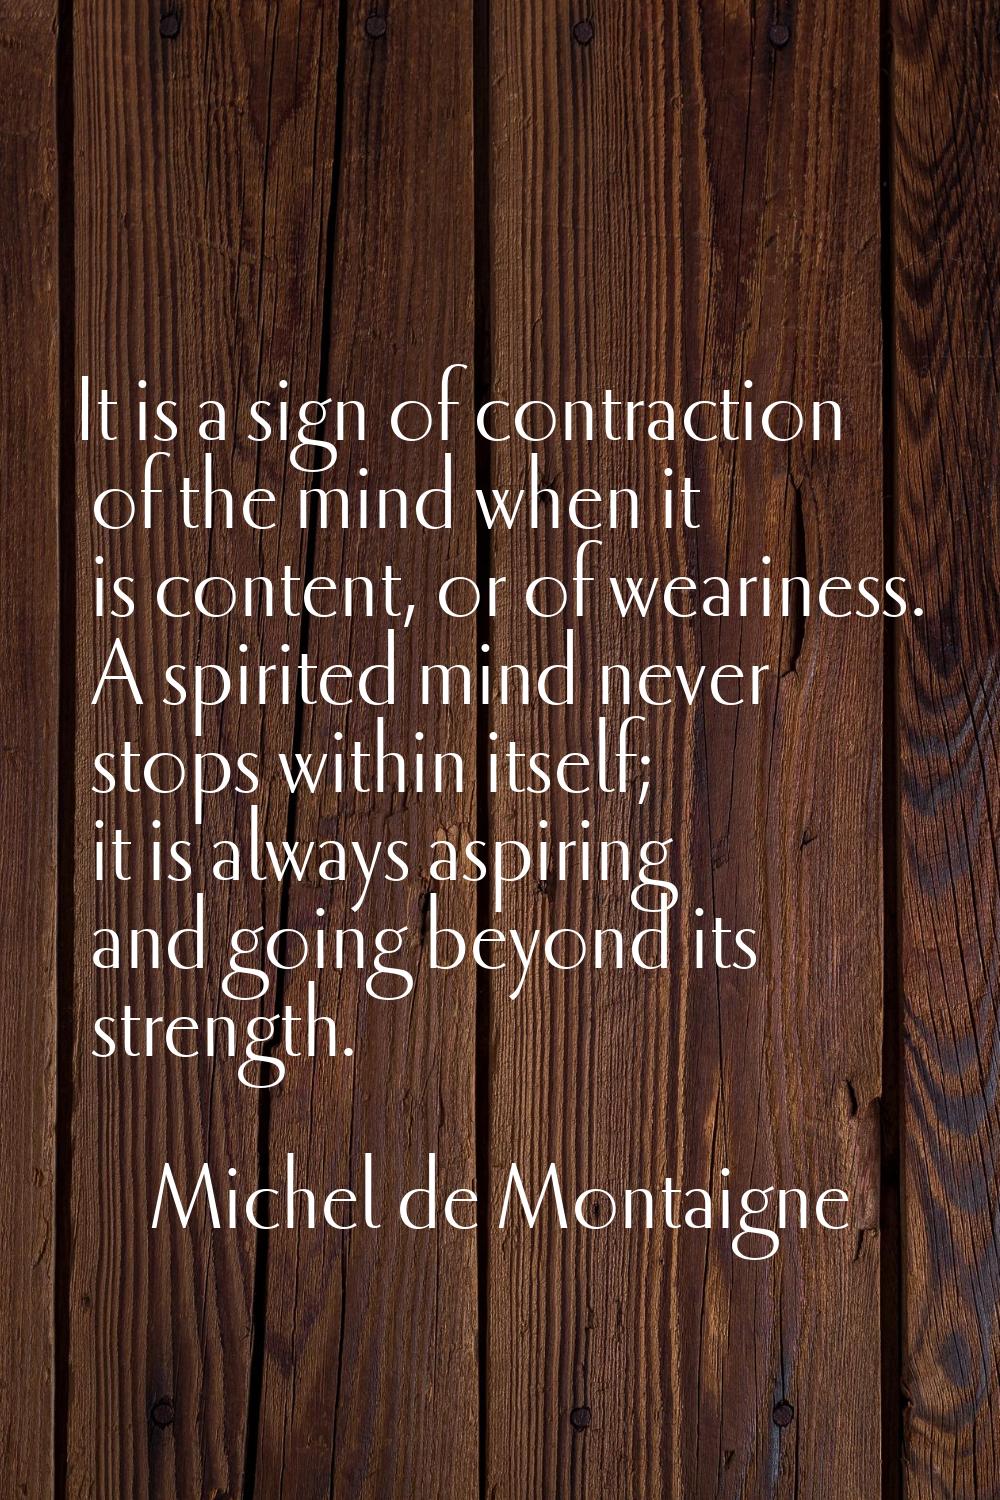 It is a sign of contraction of the mind when it is content, or of weariness. A spirited mind never 